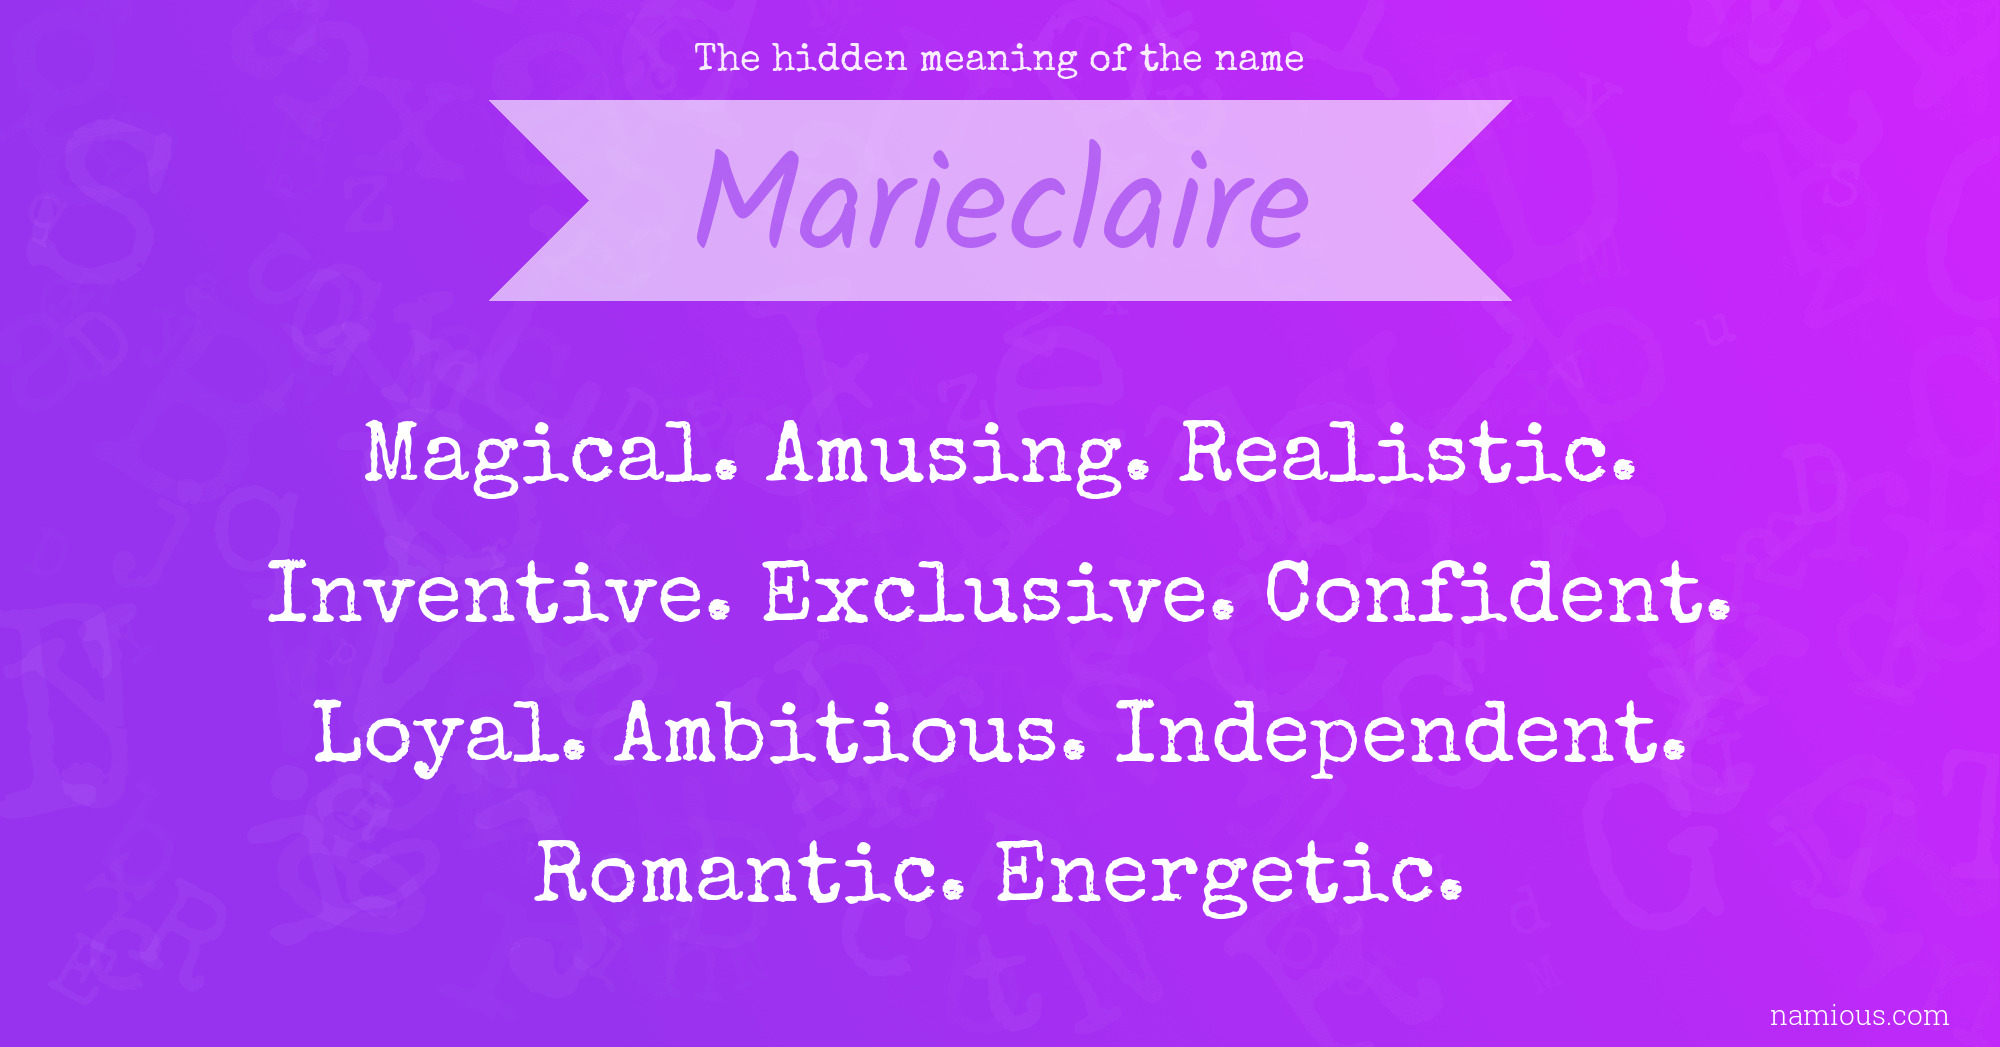 The hidden meaning of the name Marieclaire